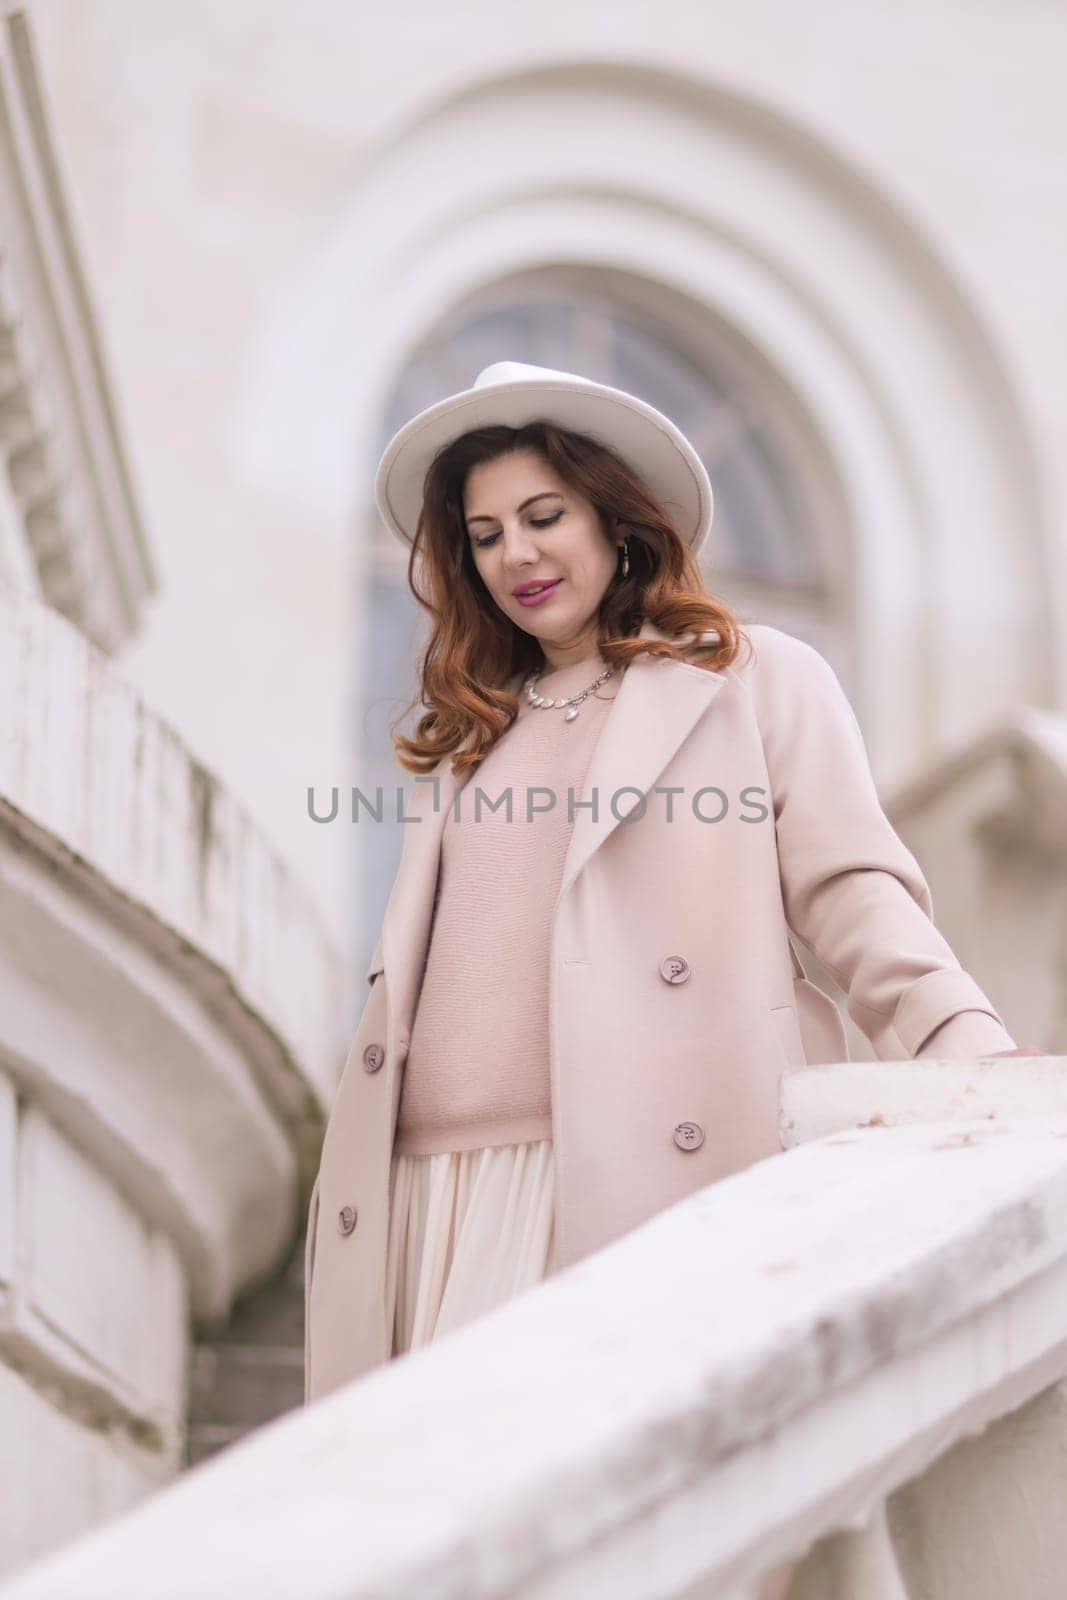 woman in elegant attire against an intricate architectural backdrop, harmoniously blending modern fashion with historical allure. The soft daylight adds to its timeless appeal. by Matiunina